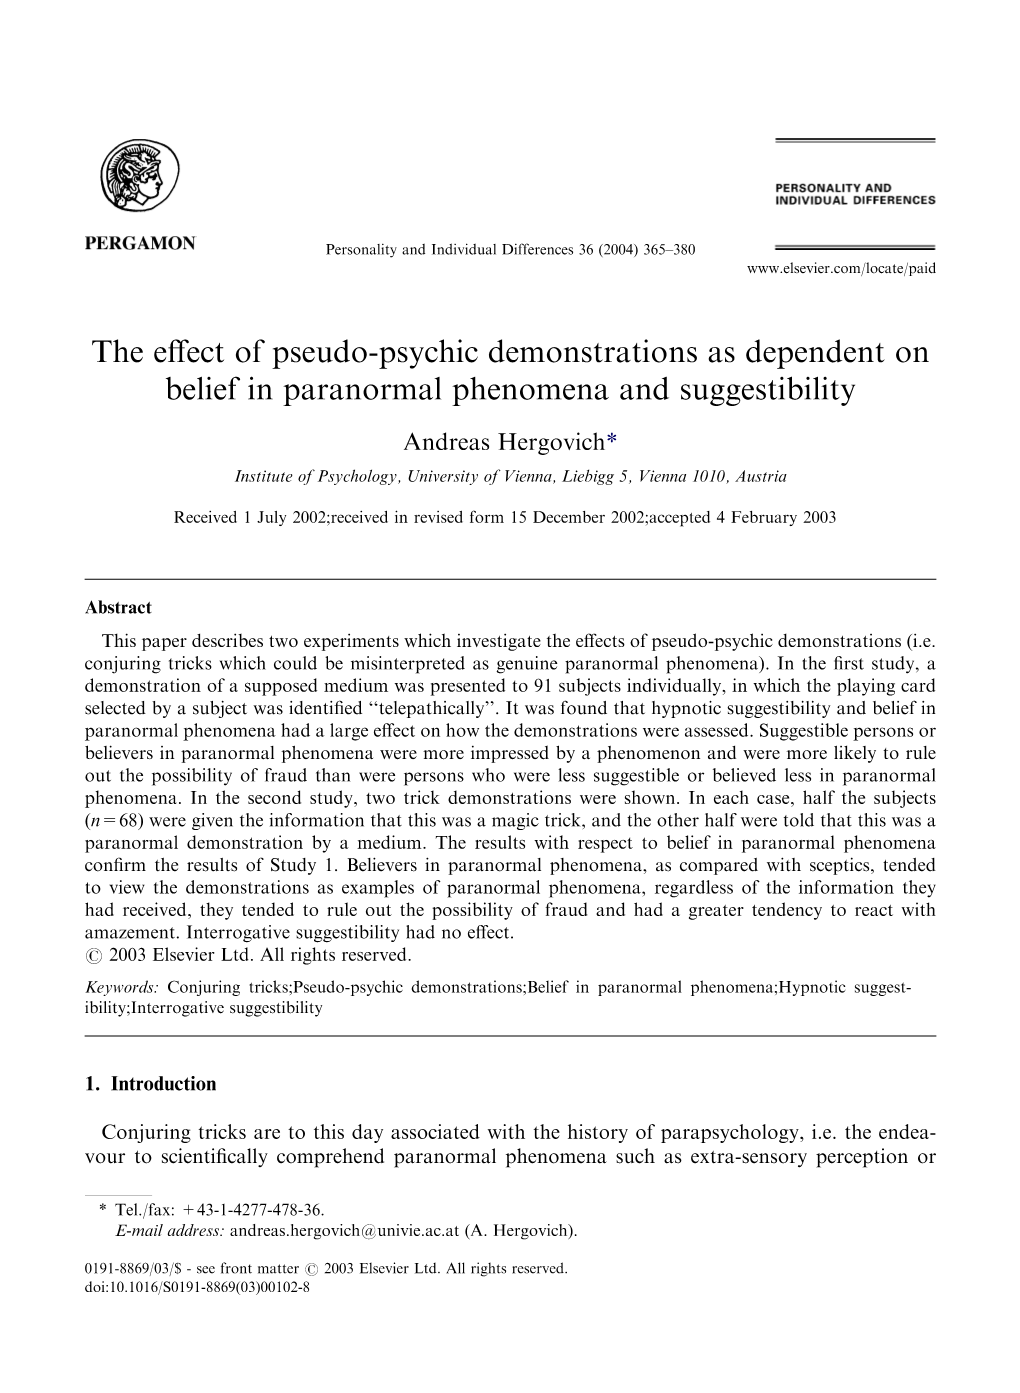 The Effect of Pseudo-Psychic Demonstrations As Dependent on Belief in Paranormal Phenomena and Suggestibility